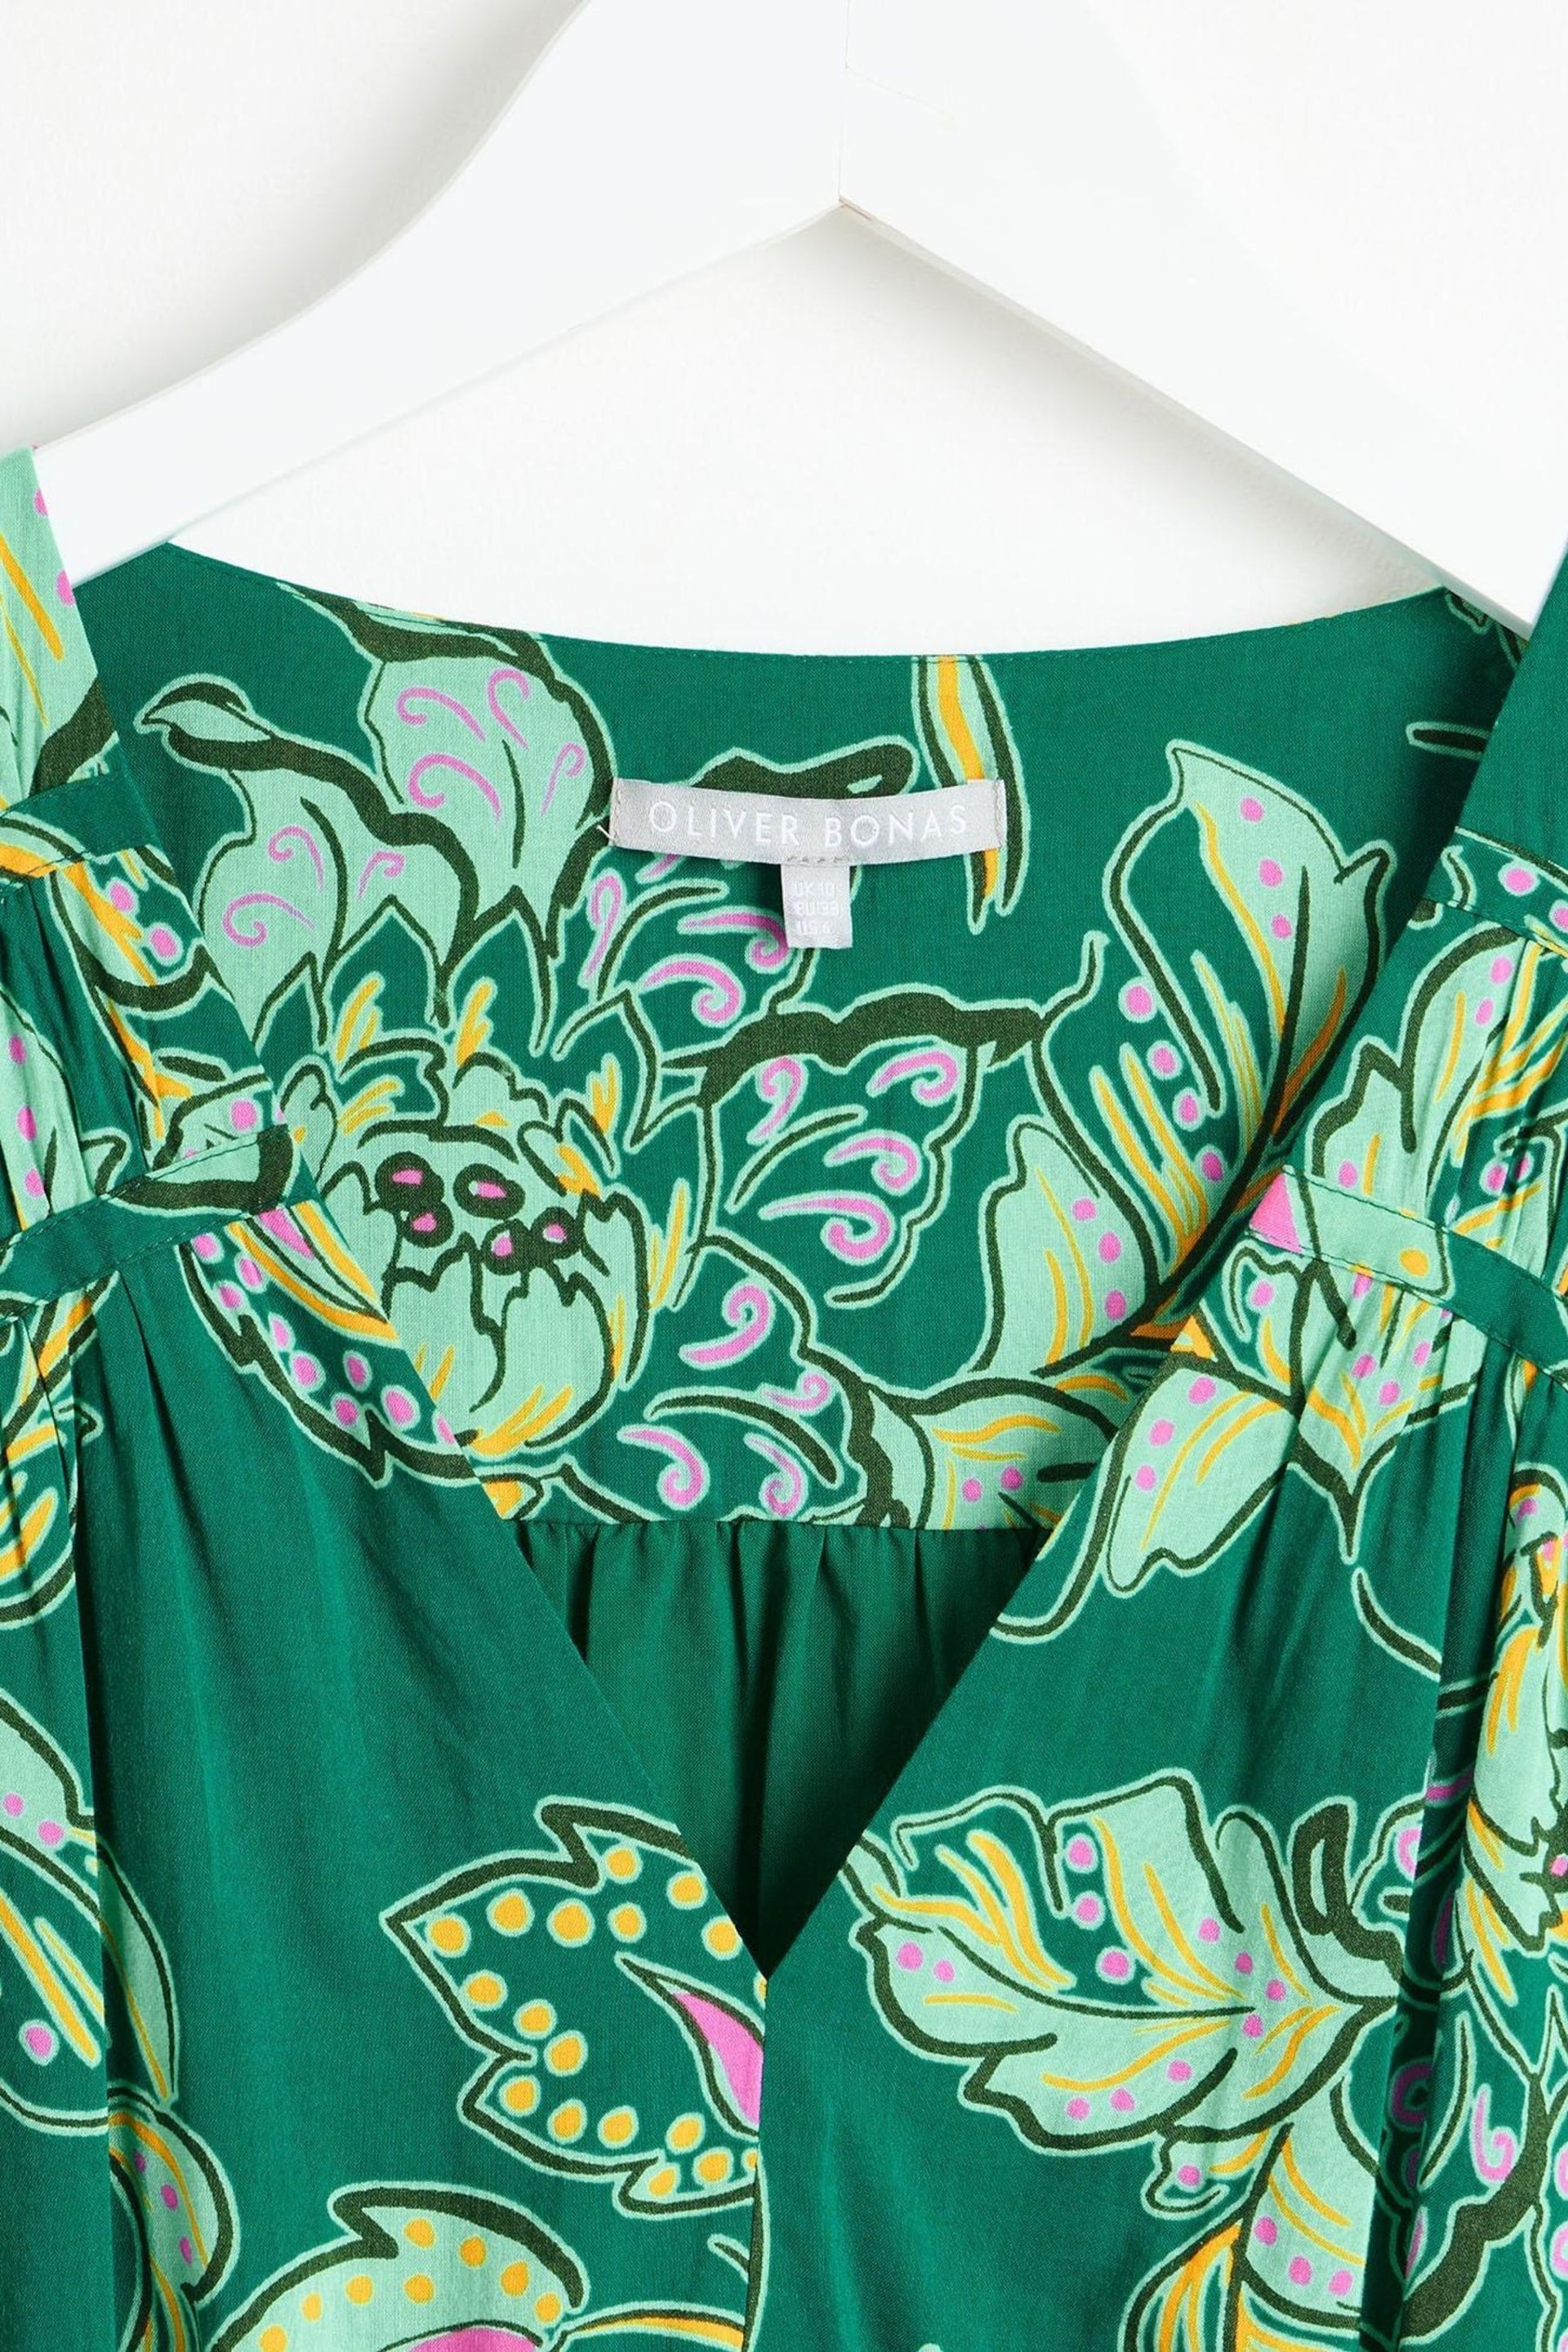 Oliver Bonas Green Mini Paisley Floral Tiered Dress - Image 3 of 6